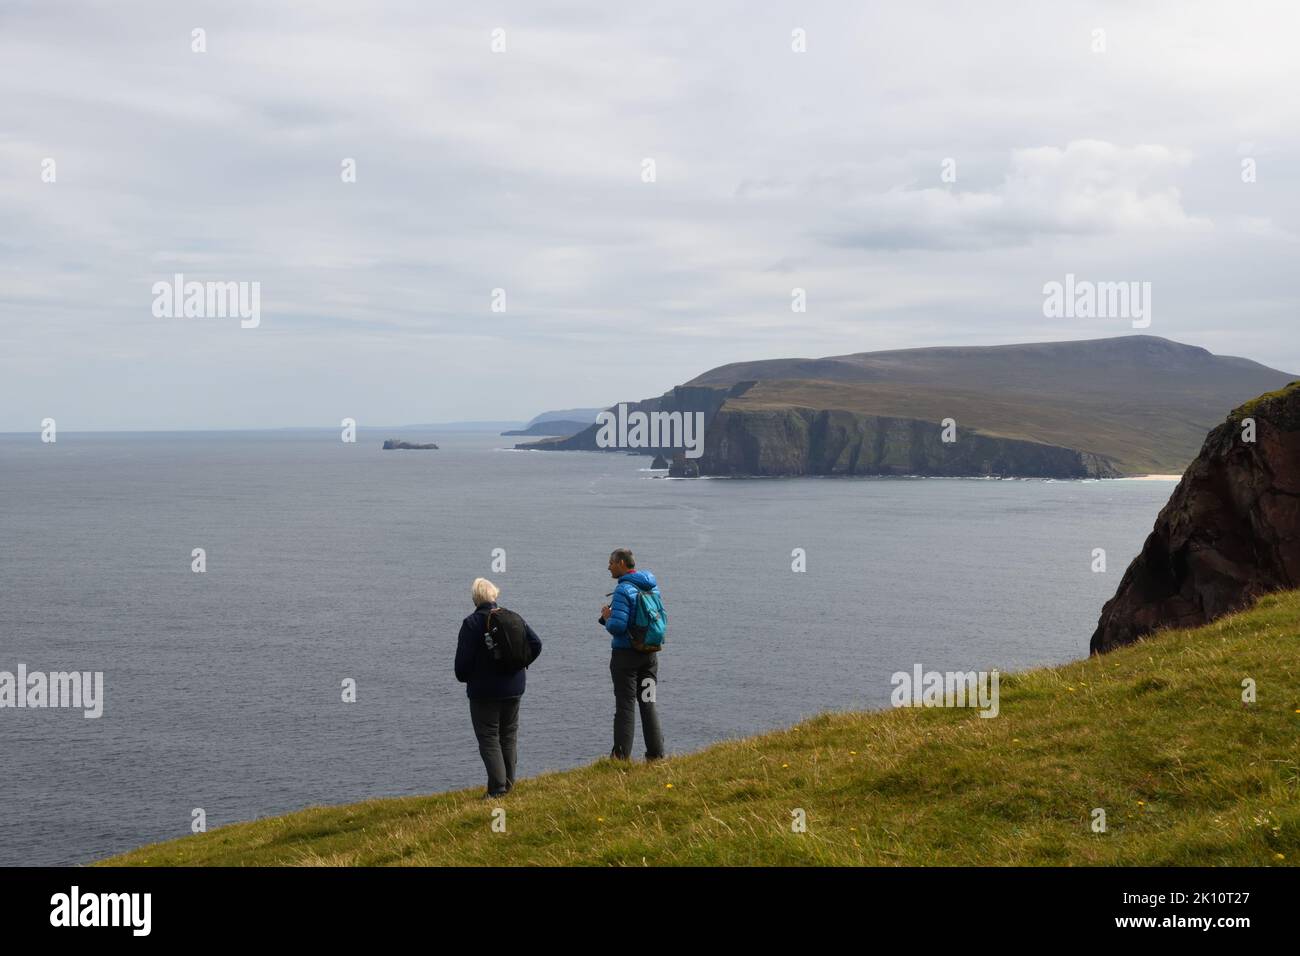 Tourists survey the cliffs and Atlantic Ocean from Cape Wrath on the north west coastline of Scotland, UK Stock Photo